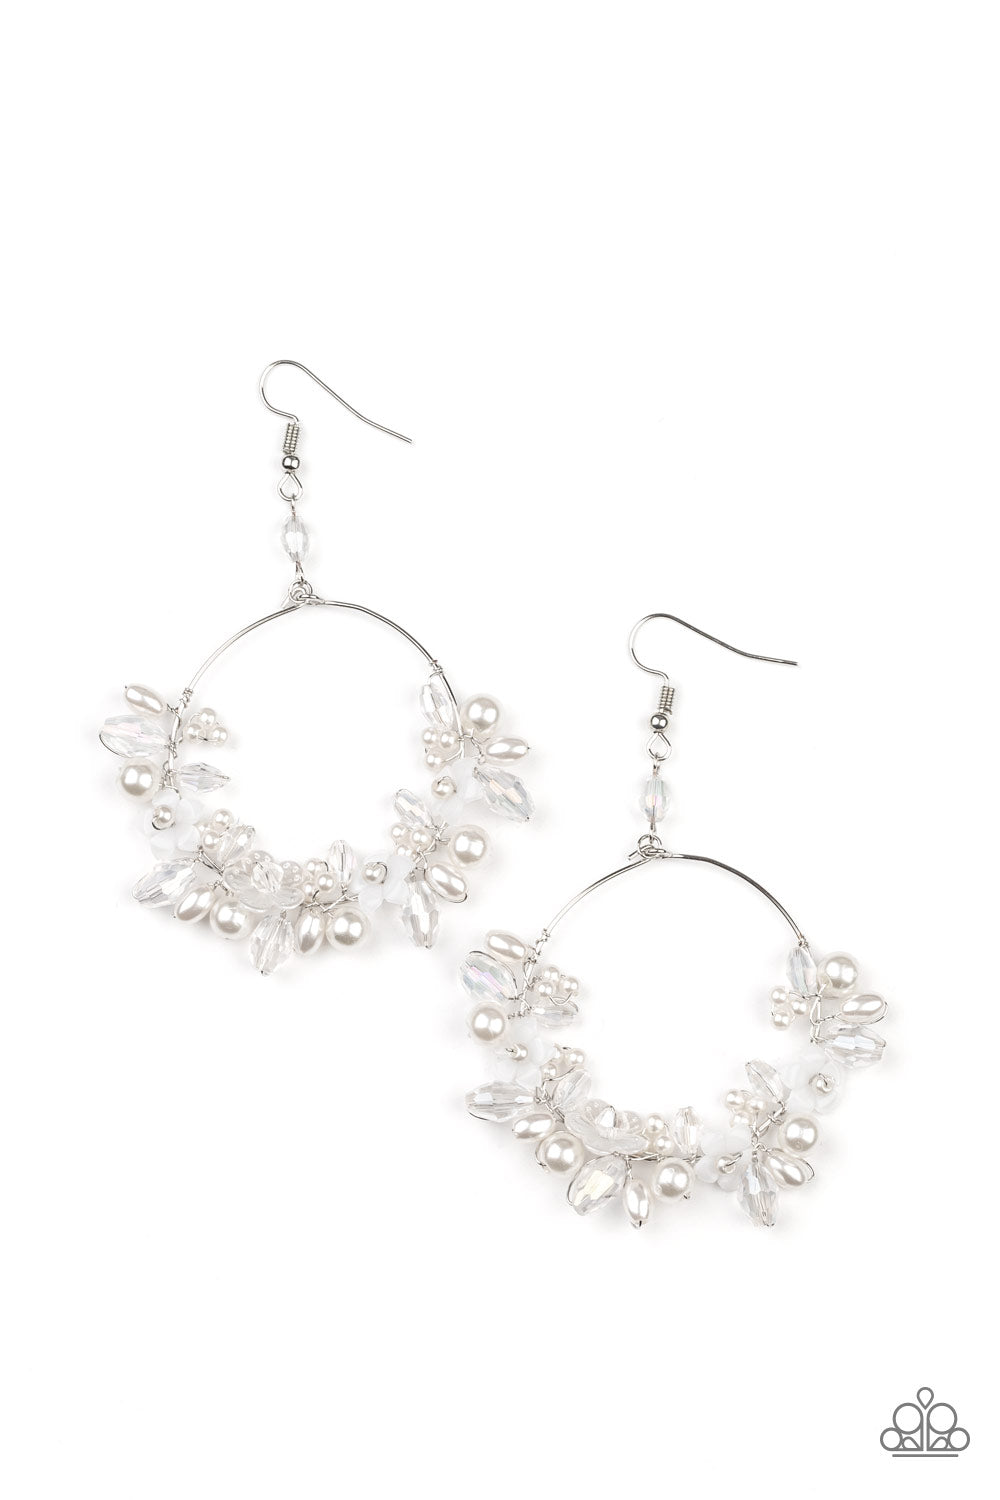 Paparazzi Accessories - Floating Gardens #E609 - White Earrings